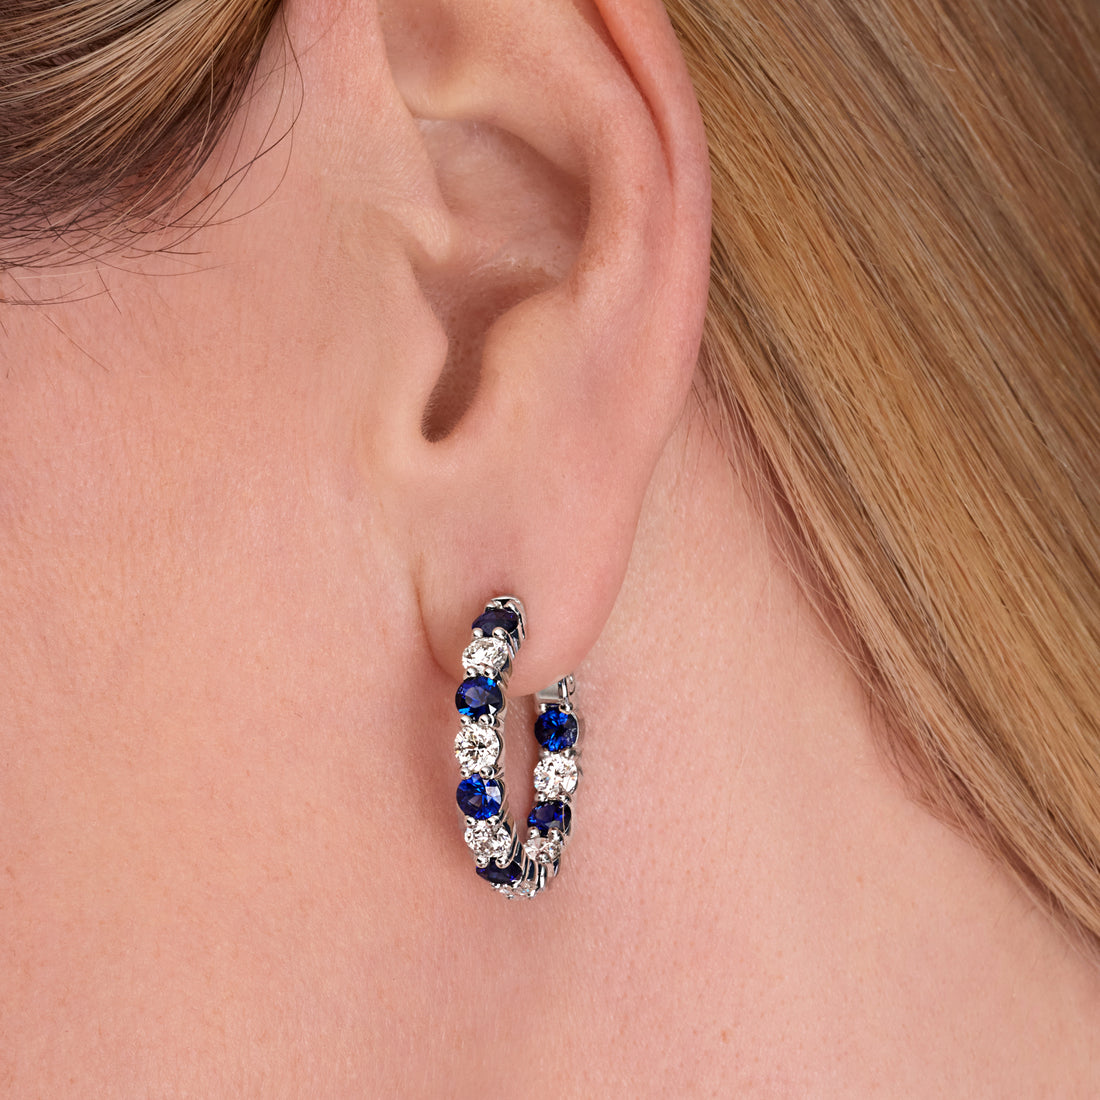 3.9 CT. Alternating Round Brilliant Blue Sapphire and Diamond Hoop Earrings in 14k White Gold